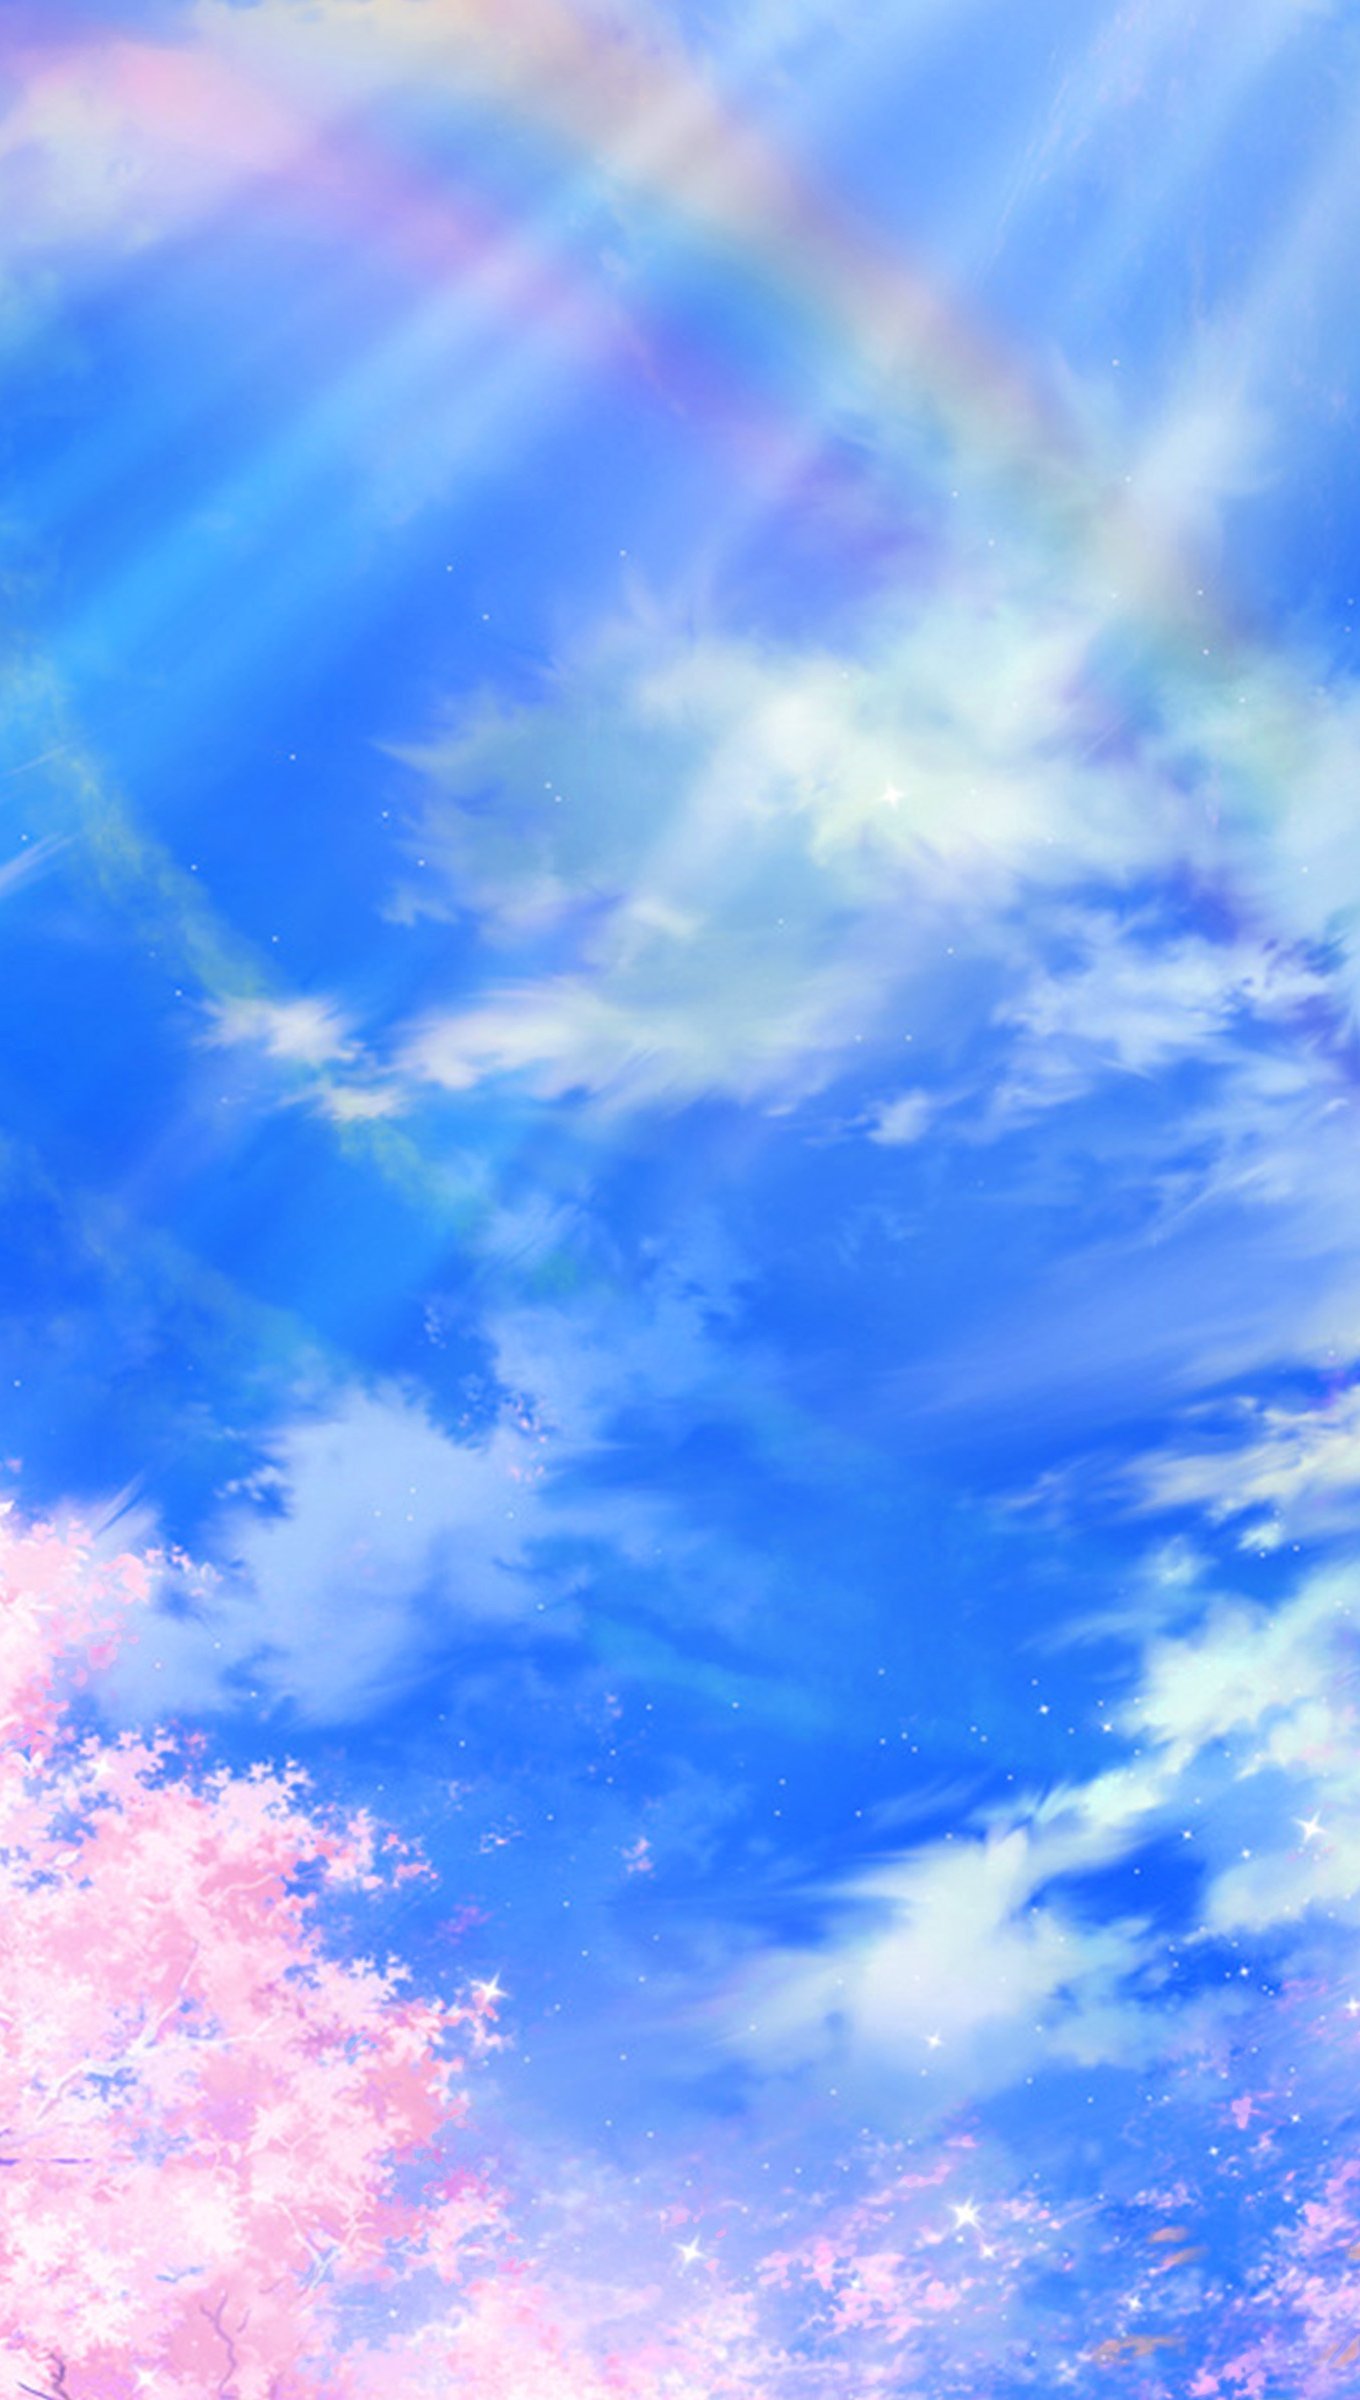 Clouds Japanese Anime Style Cirrus Background Clouds Anime Style Japan  Background Image And Wallpaper for Free Download